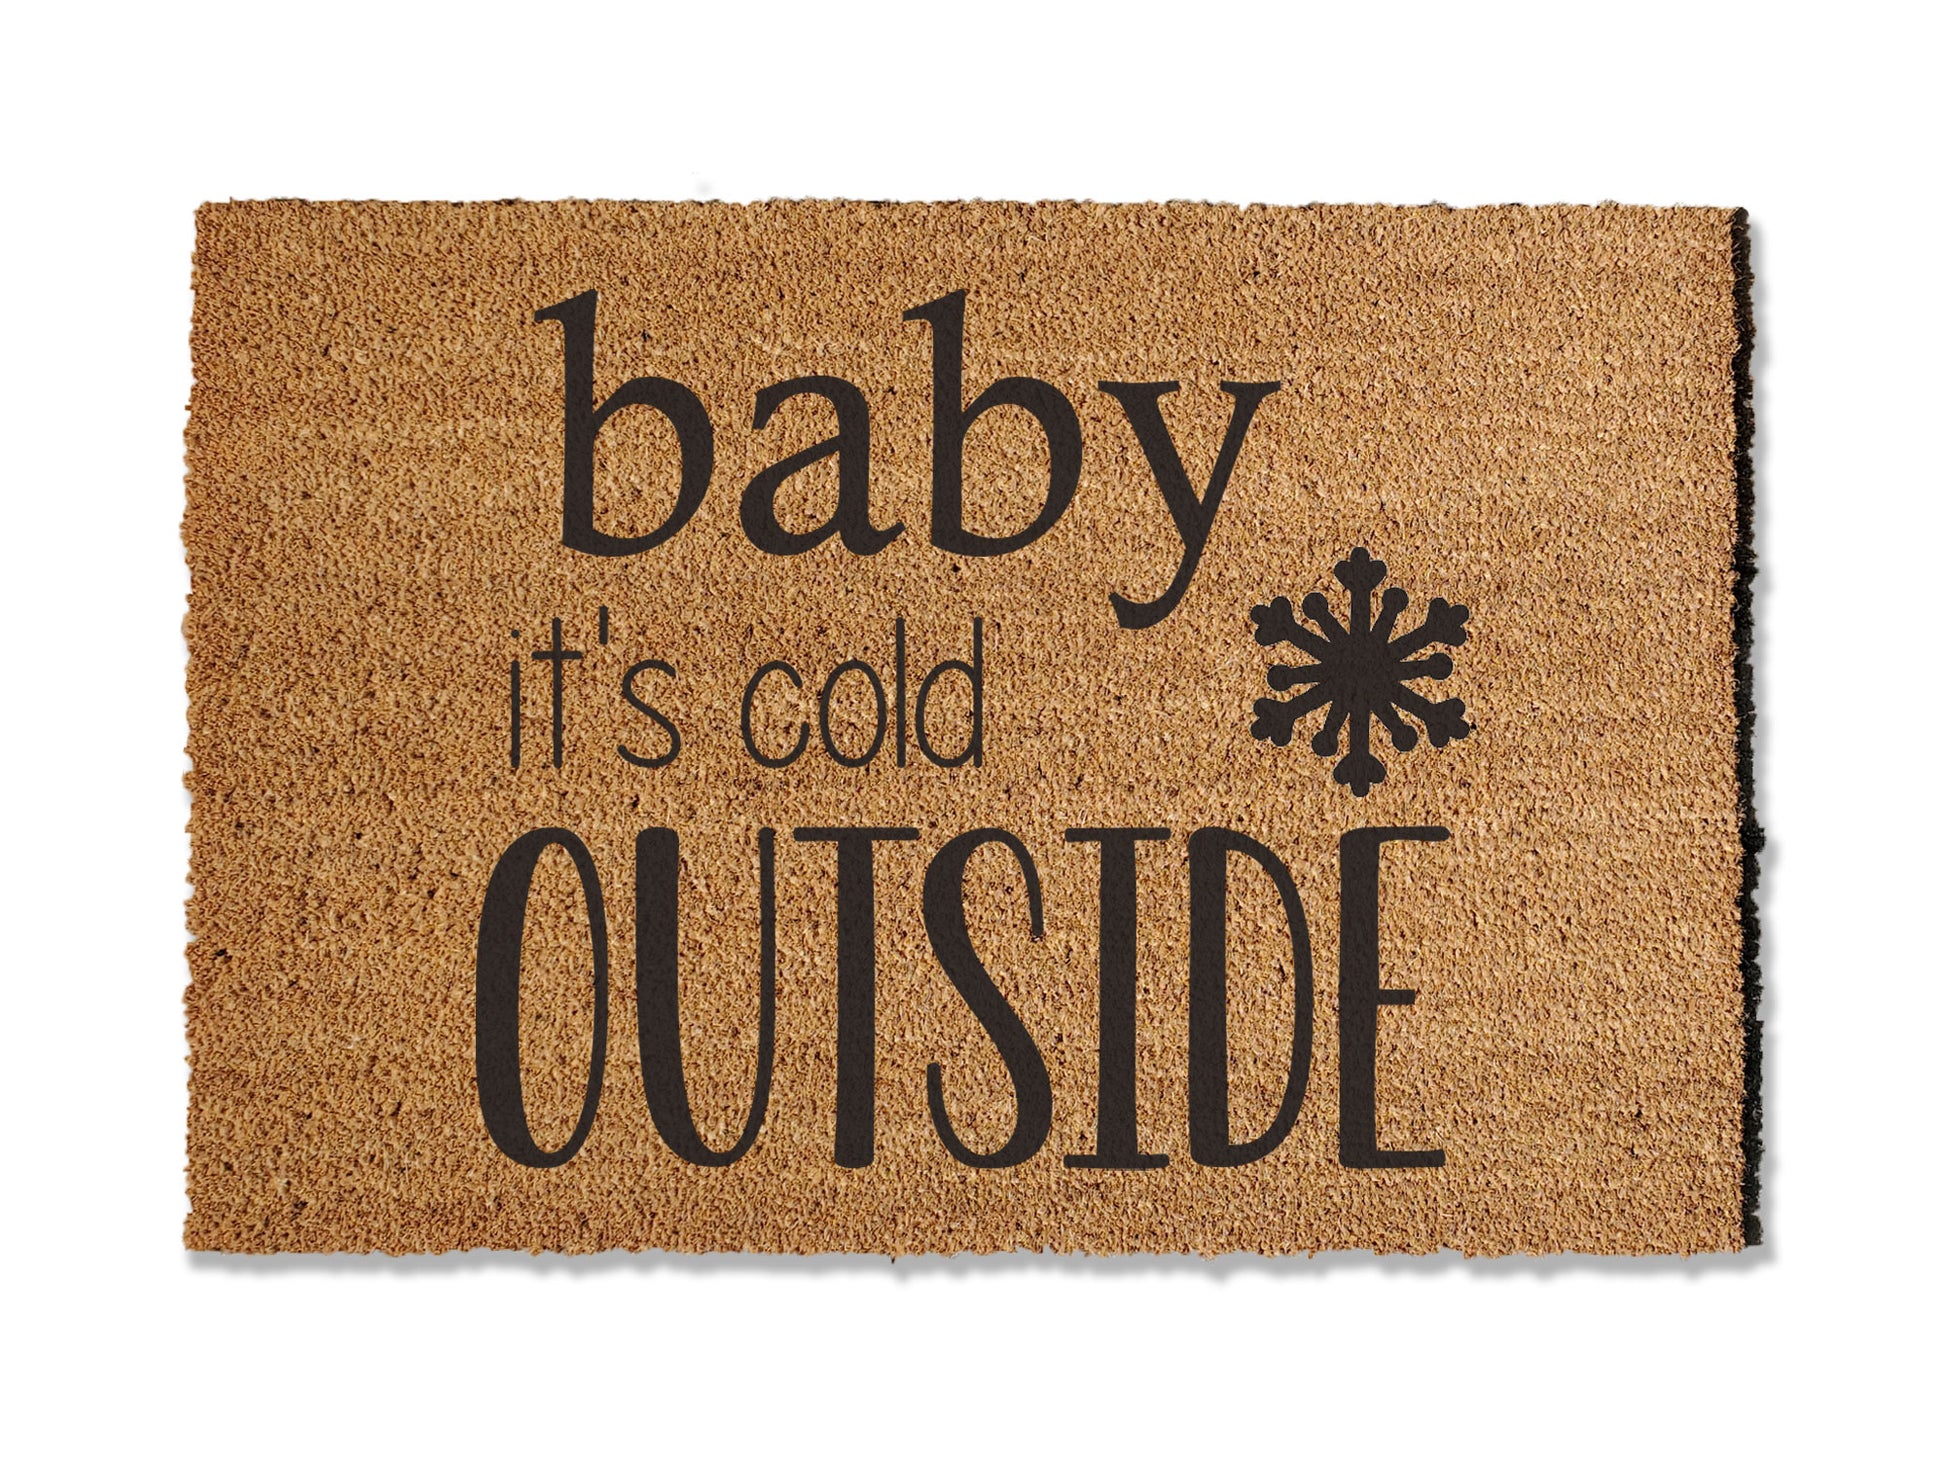 A coir doormat that is 24 inches by 36 inches and has a the text baby it's cold outside with a snowflake painted on it.